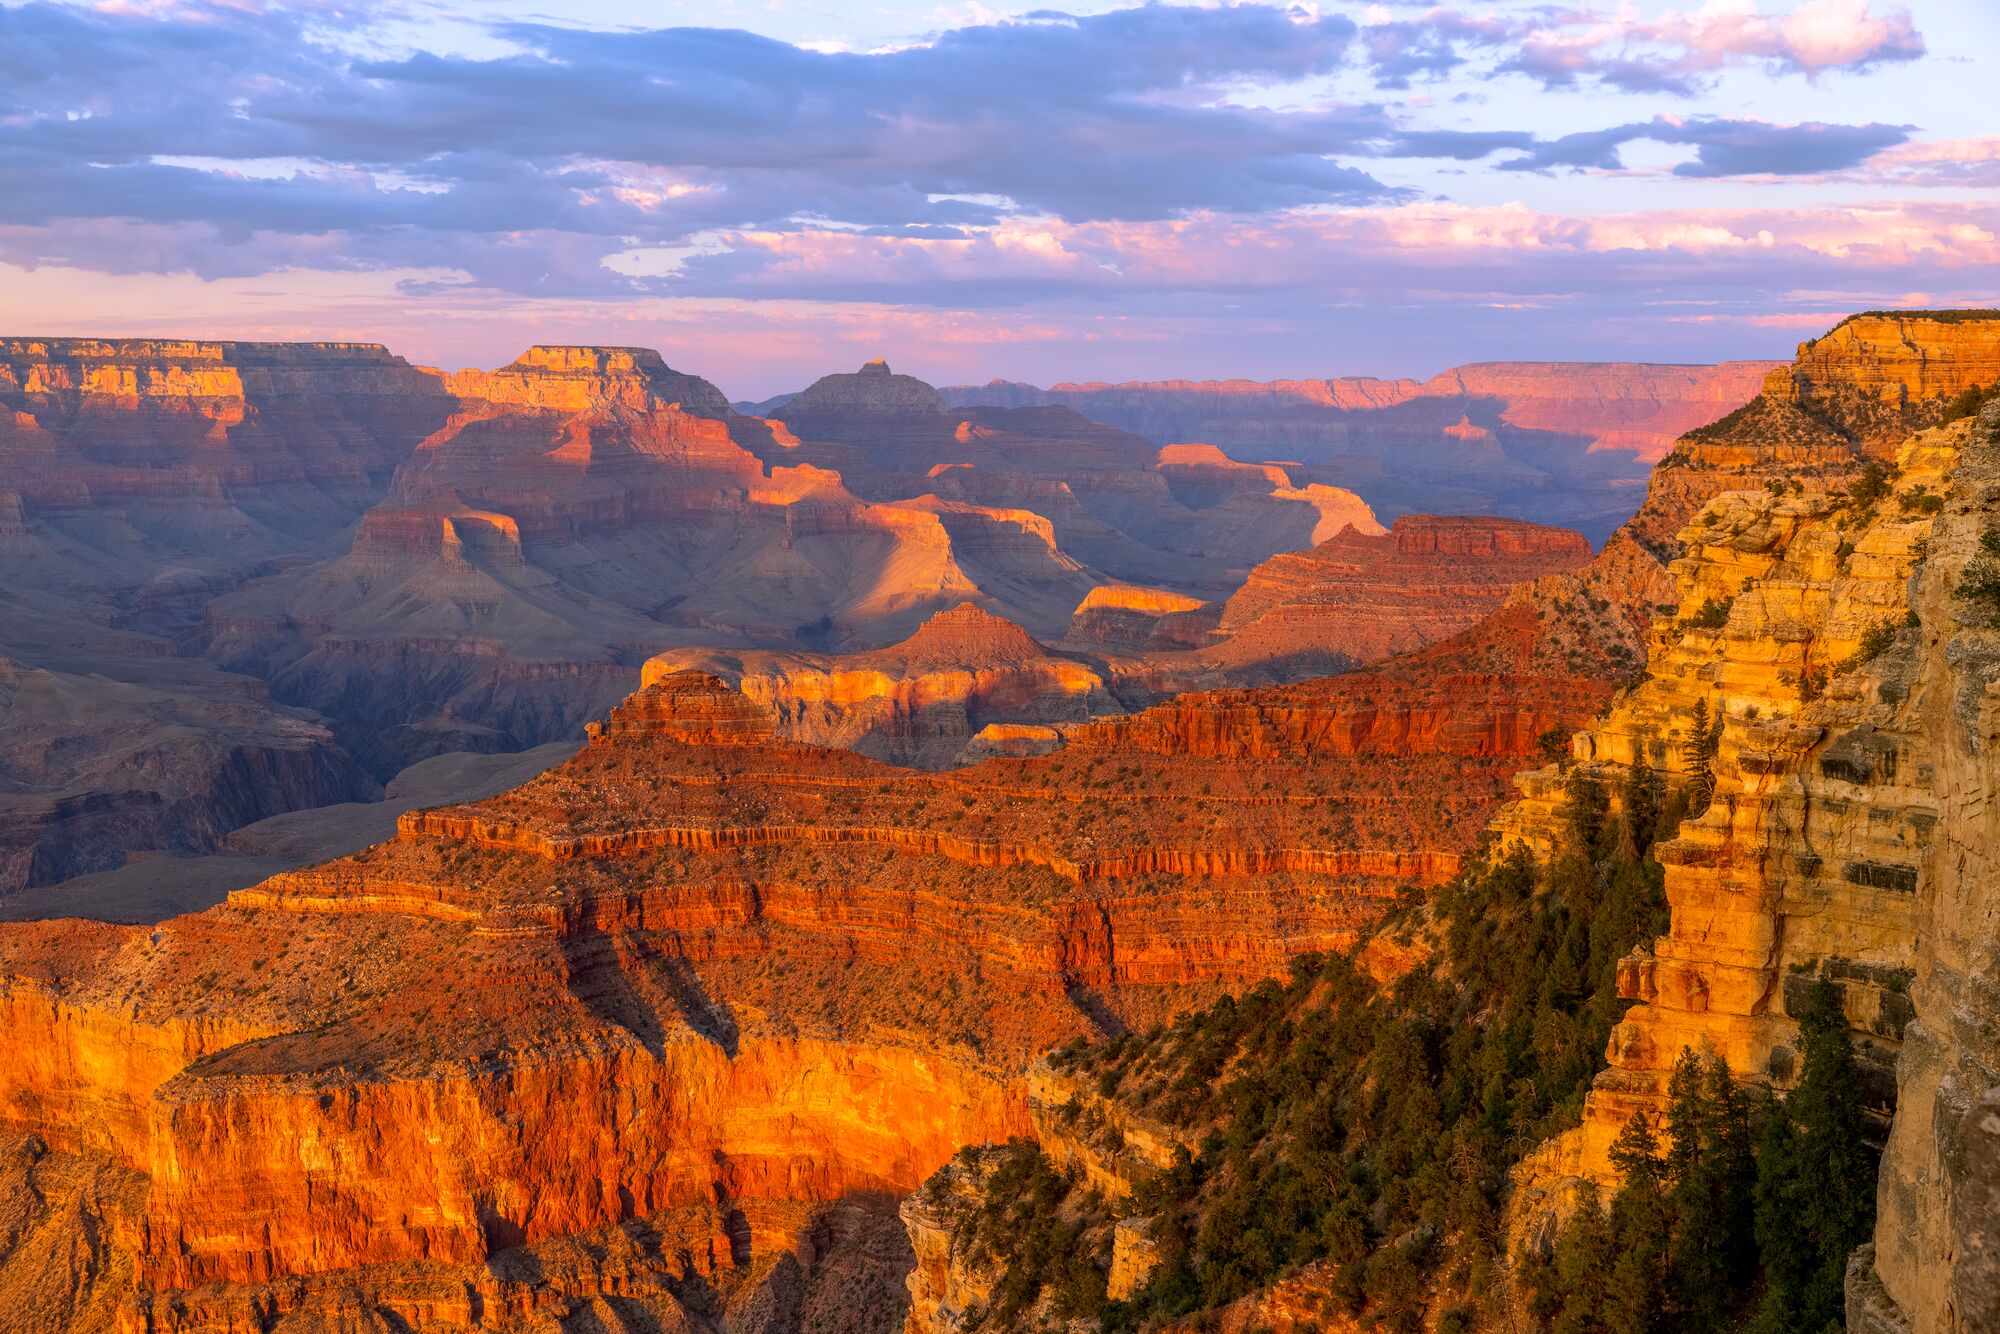 Cliffs visible at Yavapai Point in the Grand Canyon glow in the fading light of day. (K. Thomas / NPS)